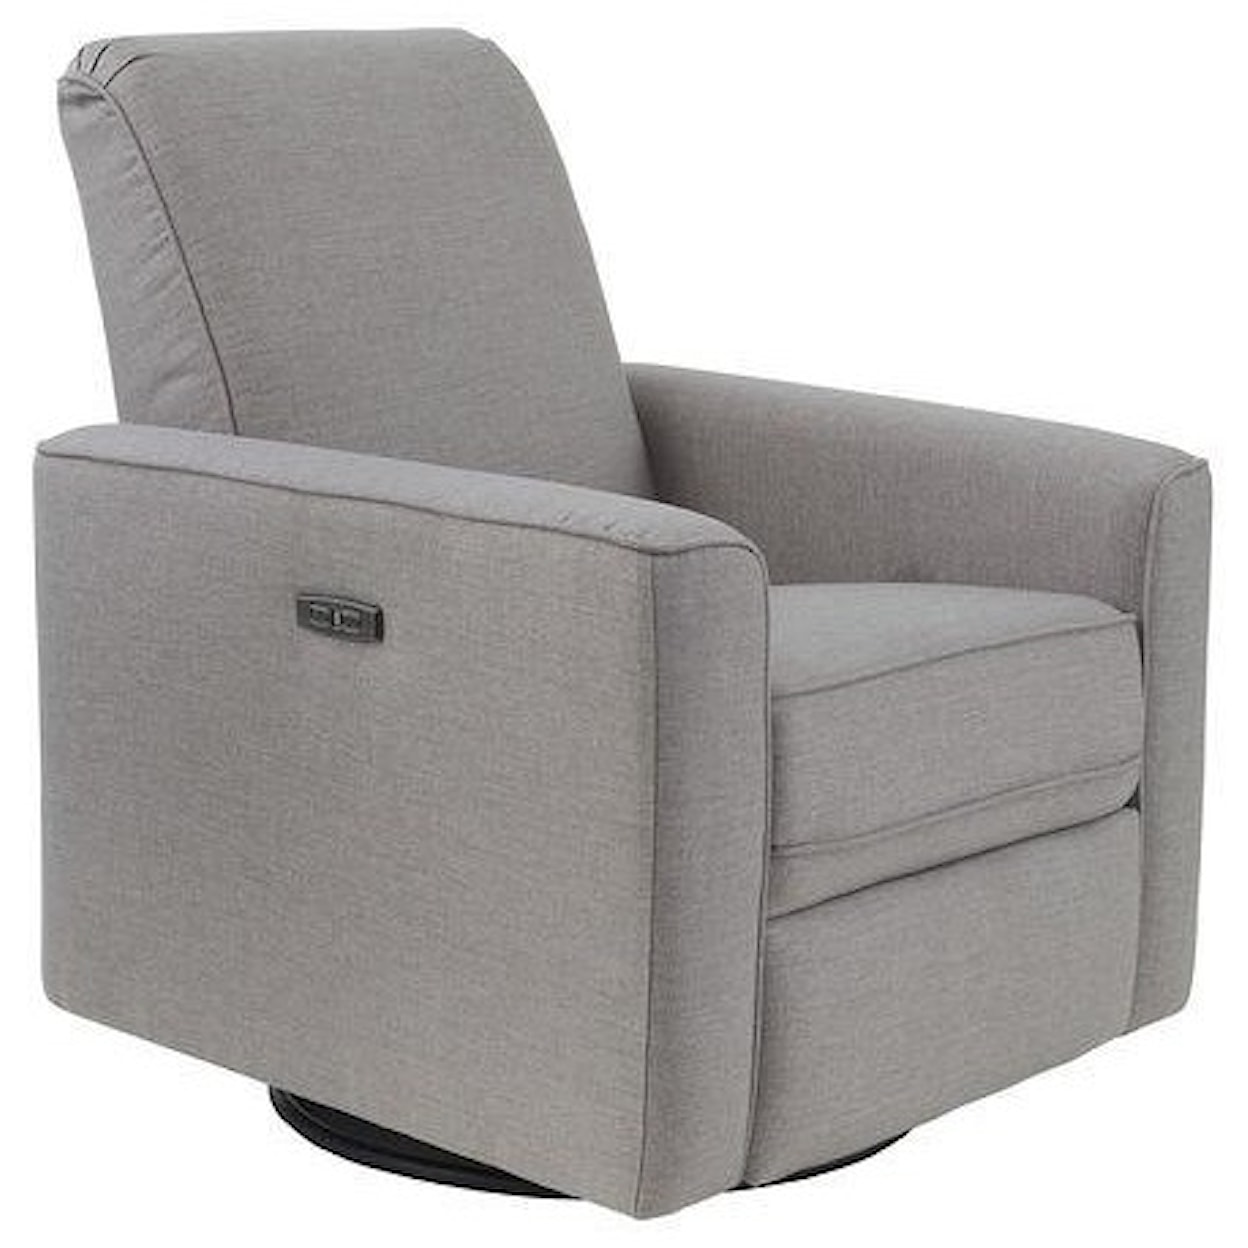 Belfort Select Aspen Power Glider Recliner with USB Charging